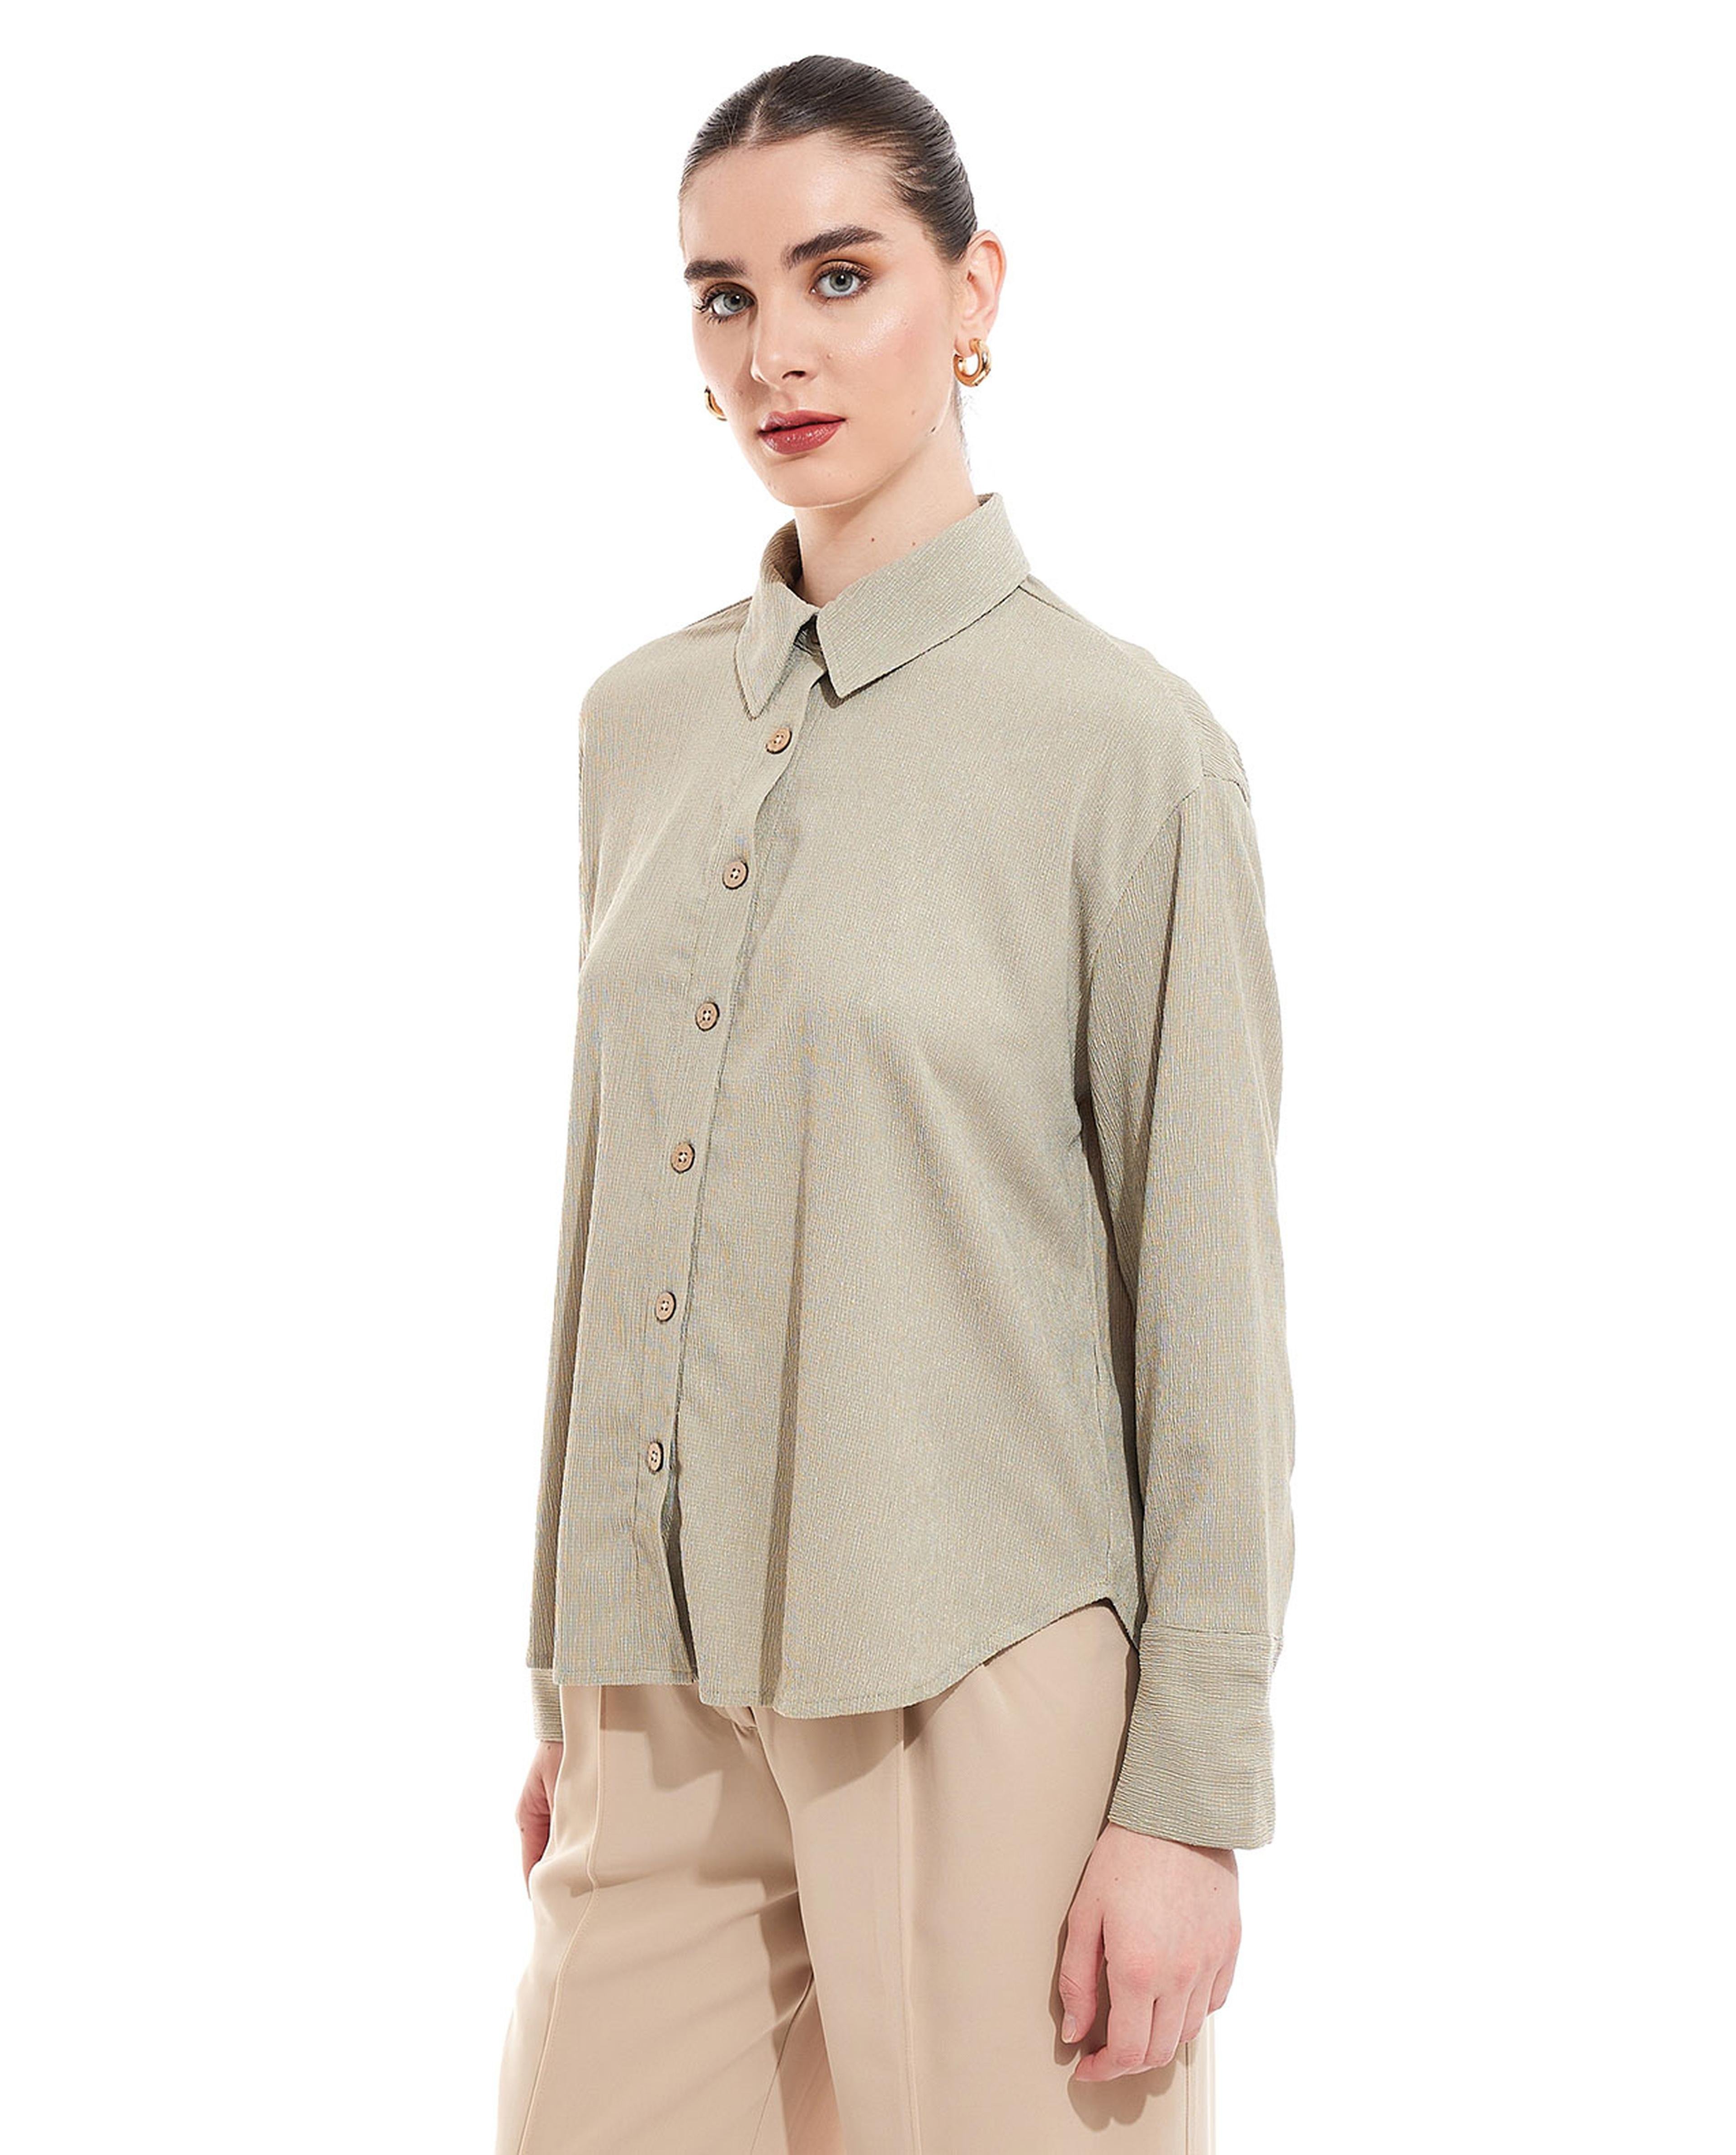 Textured Shirt with Classic Collar and Long Sleeves